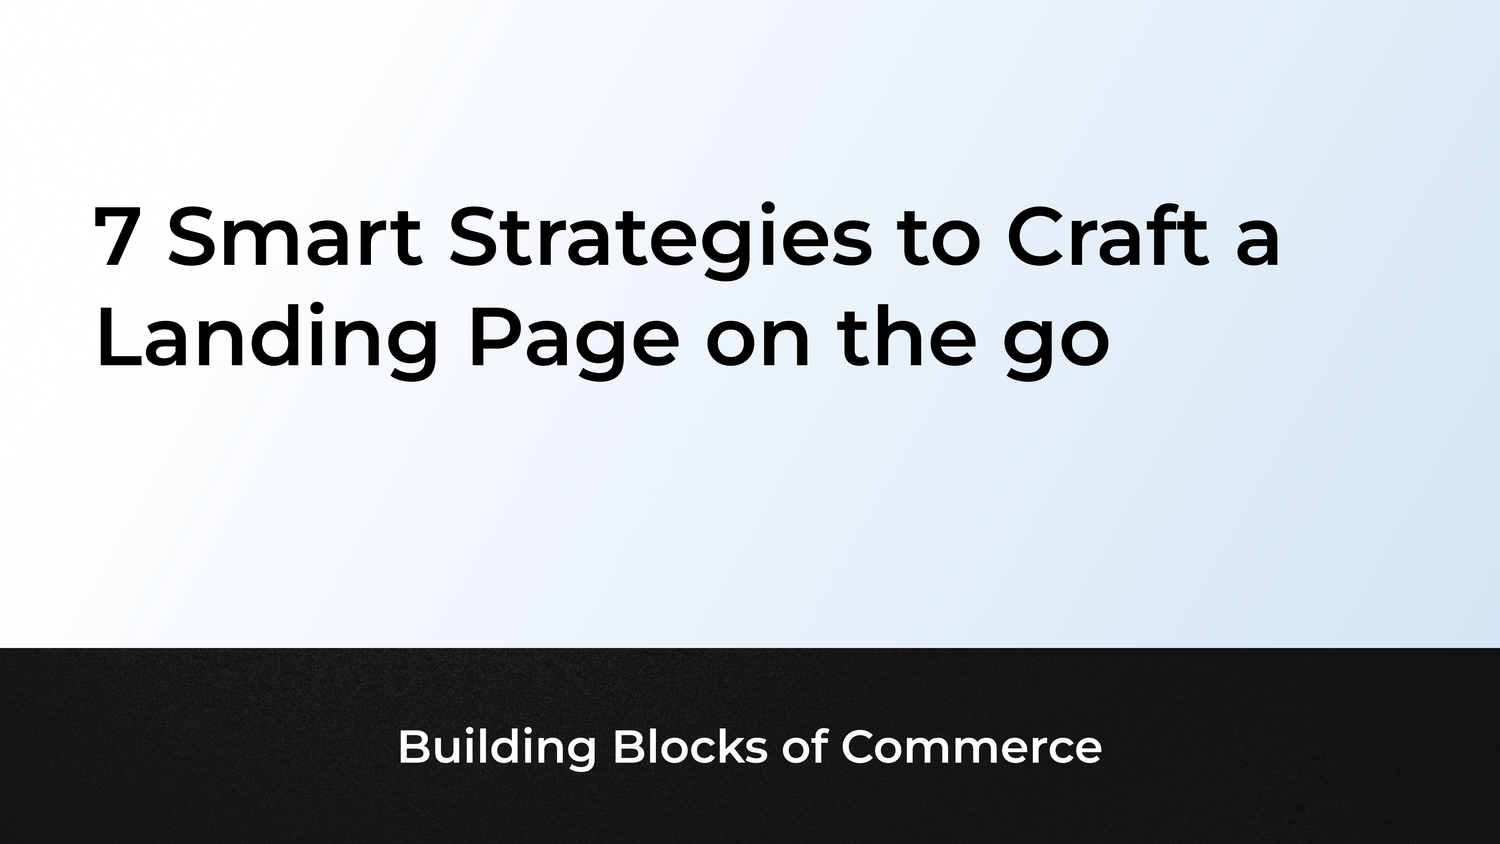 7 Smart Strategies to Craft a Landing Page on the go